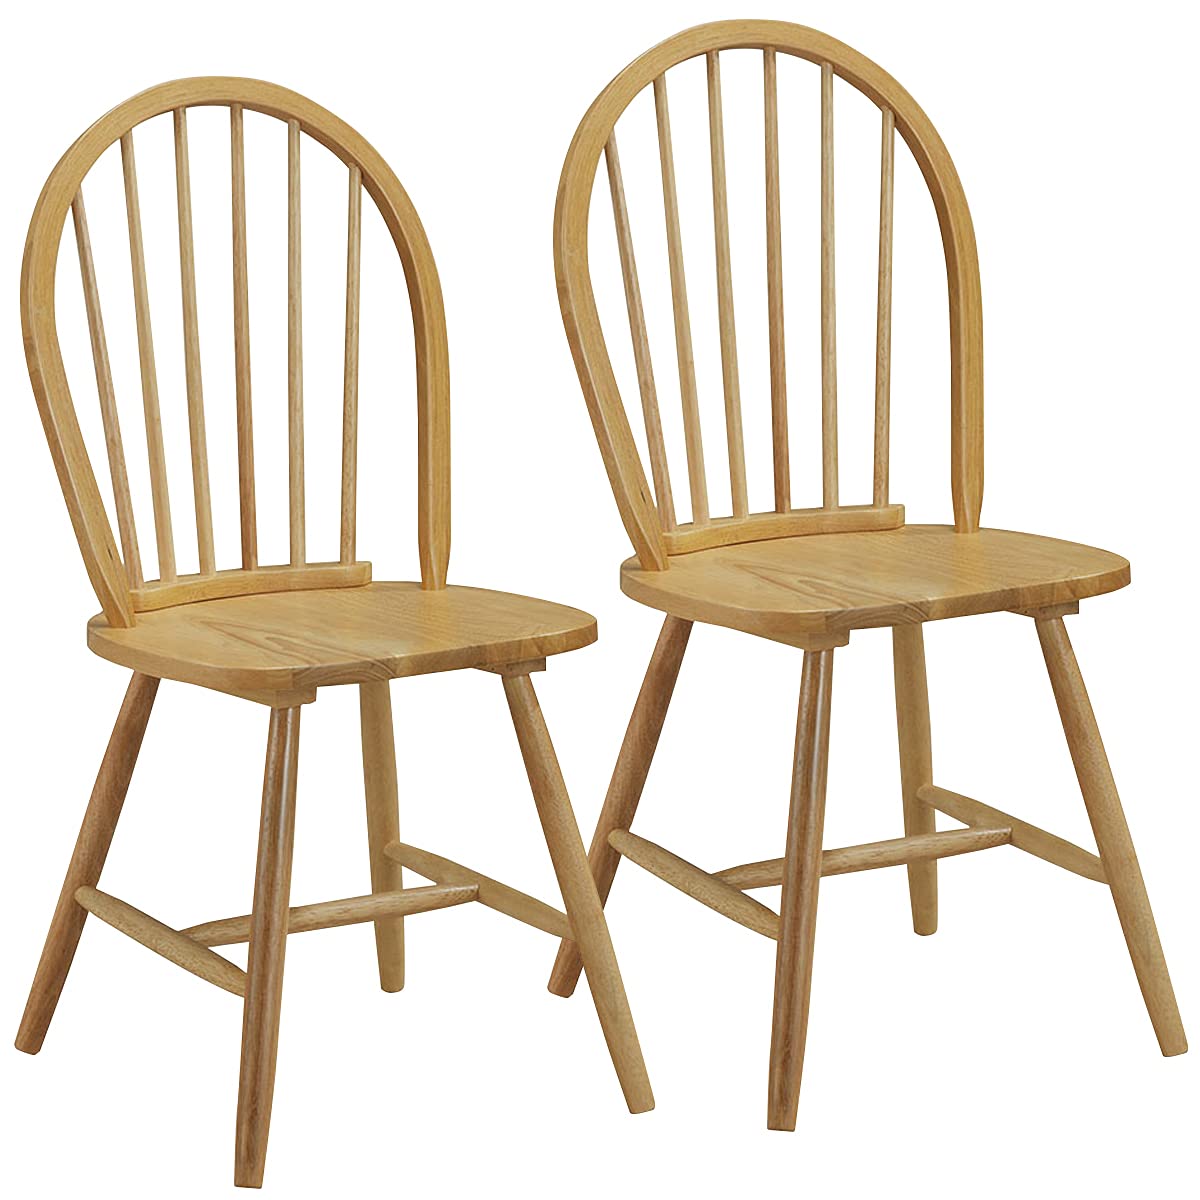 Giantex Set of 4 Windsor Chairs, Country Wood Chairs